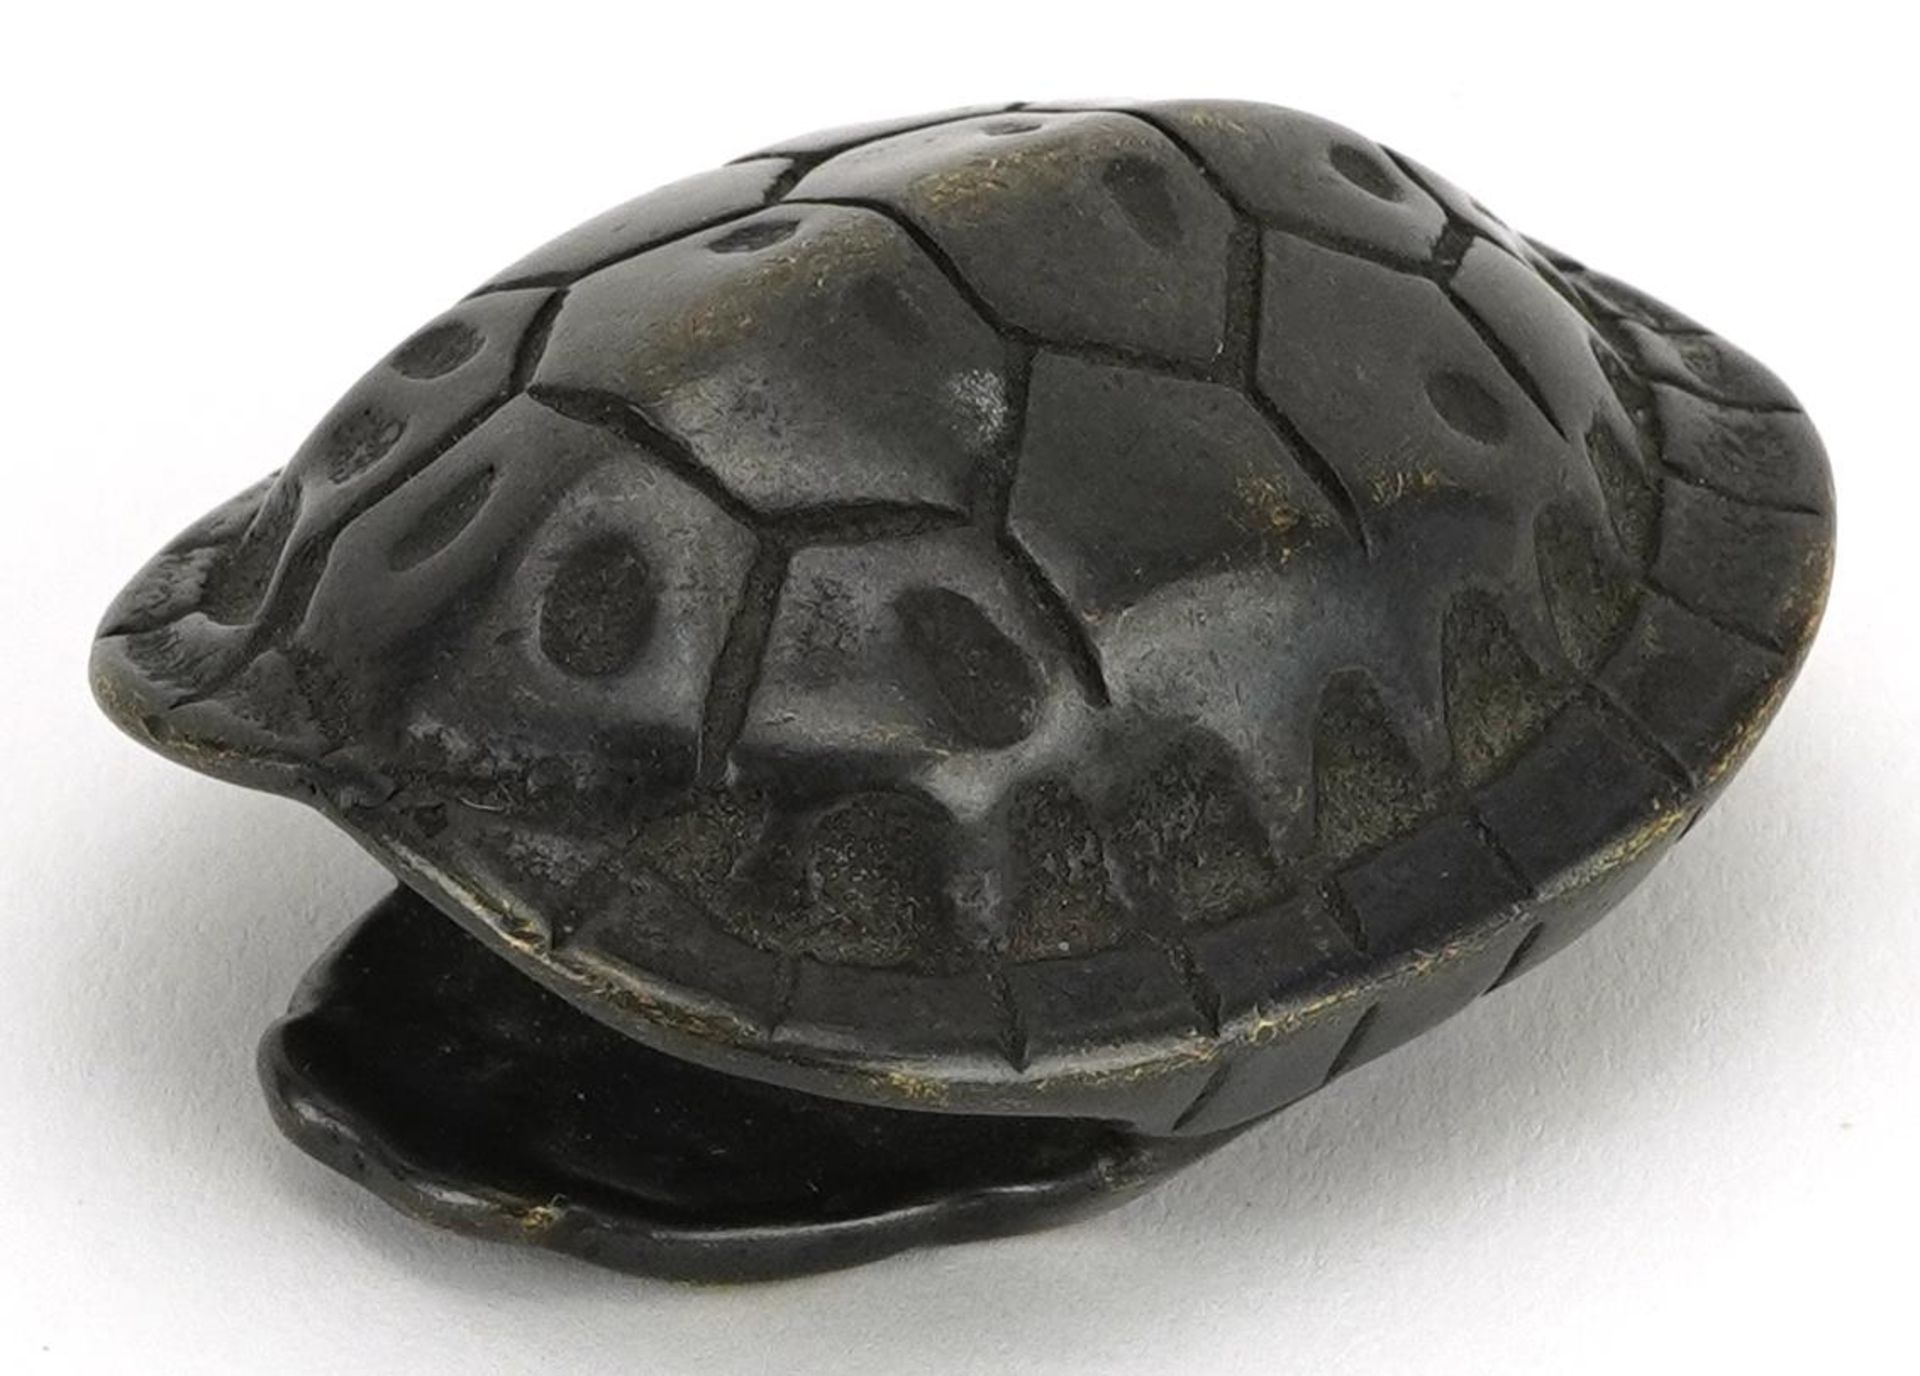 Patinated bronze model of a turtle shell, 6cm in length